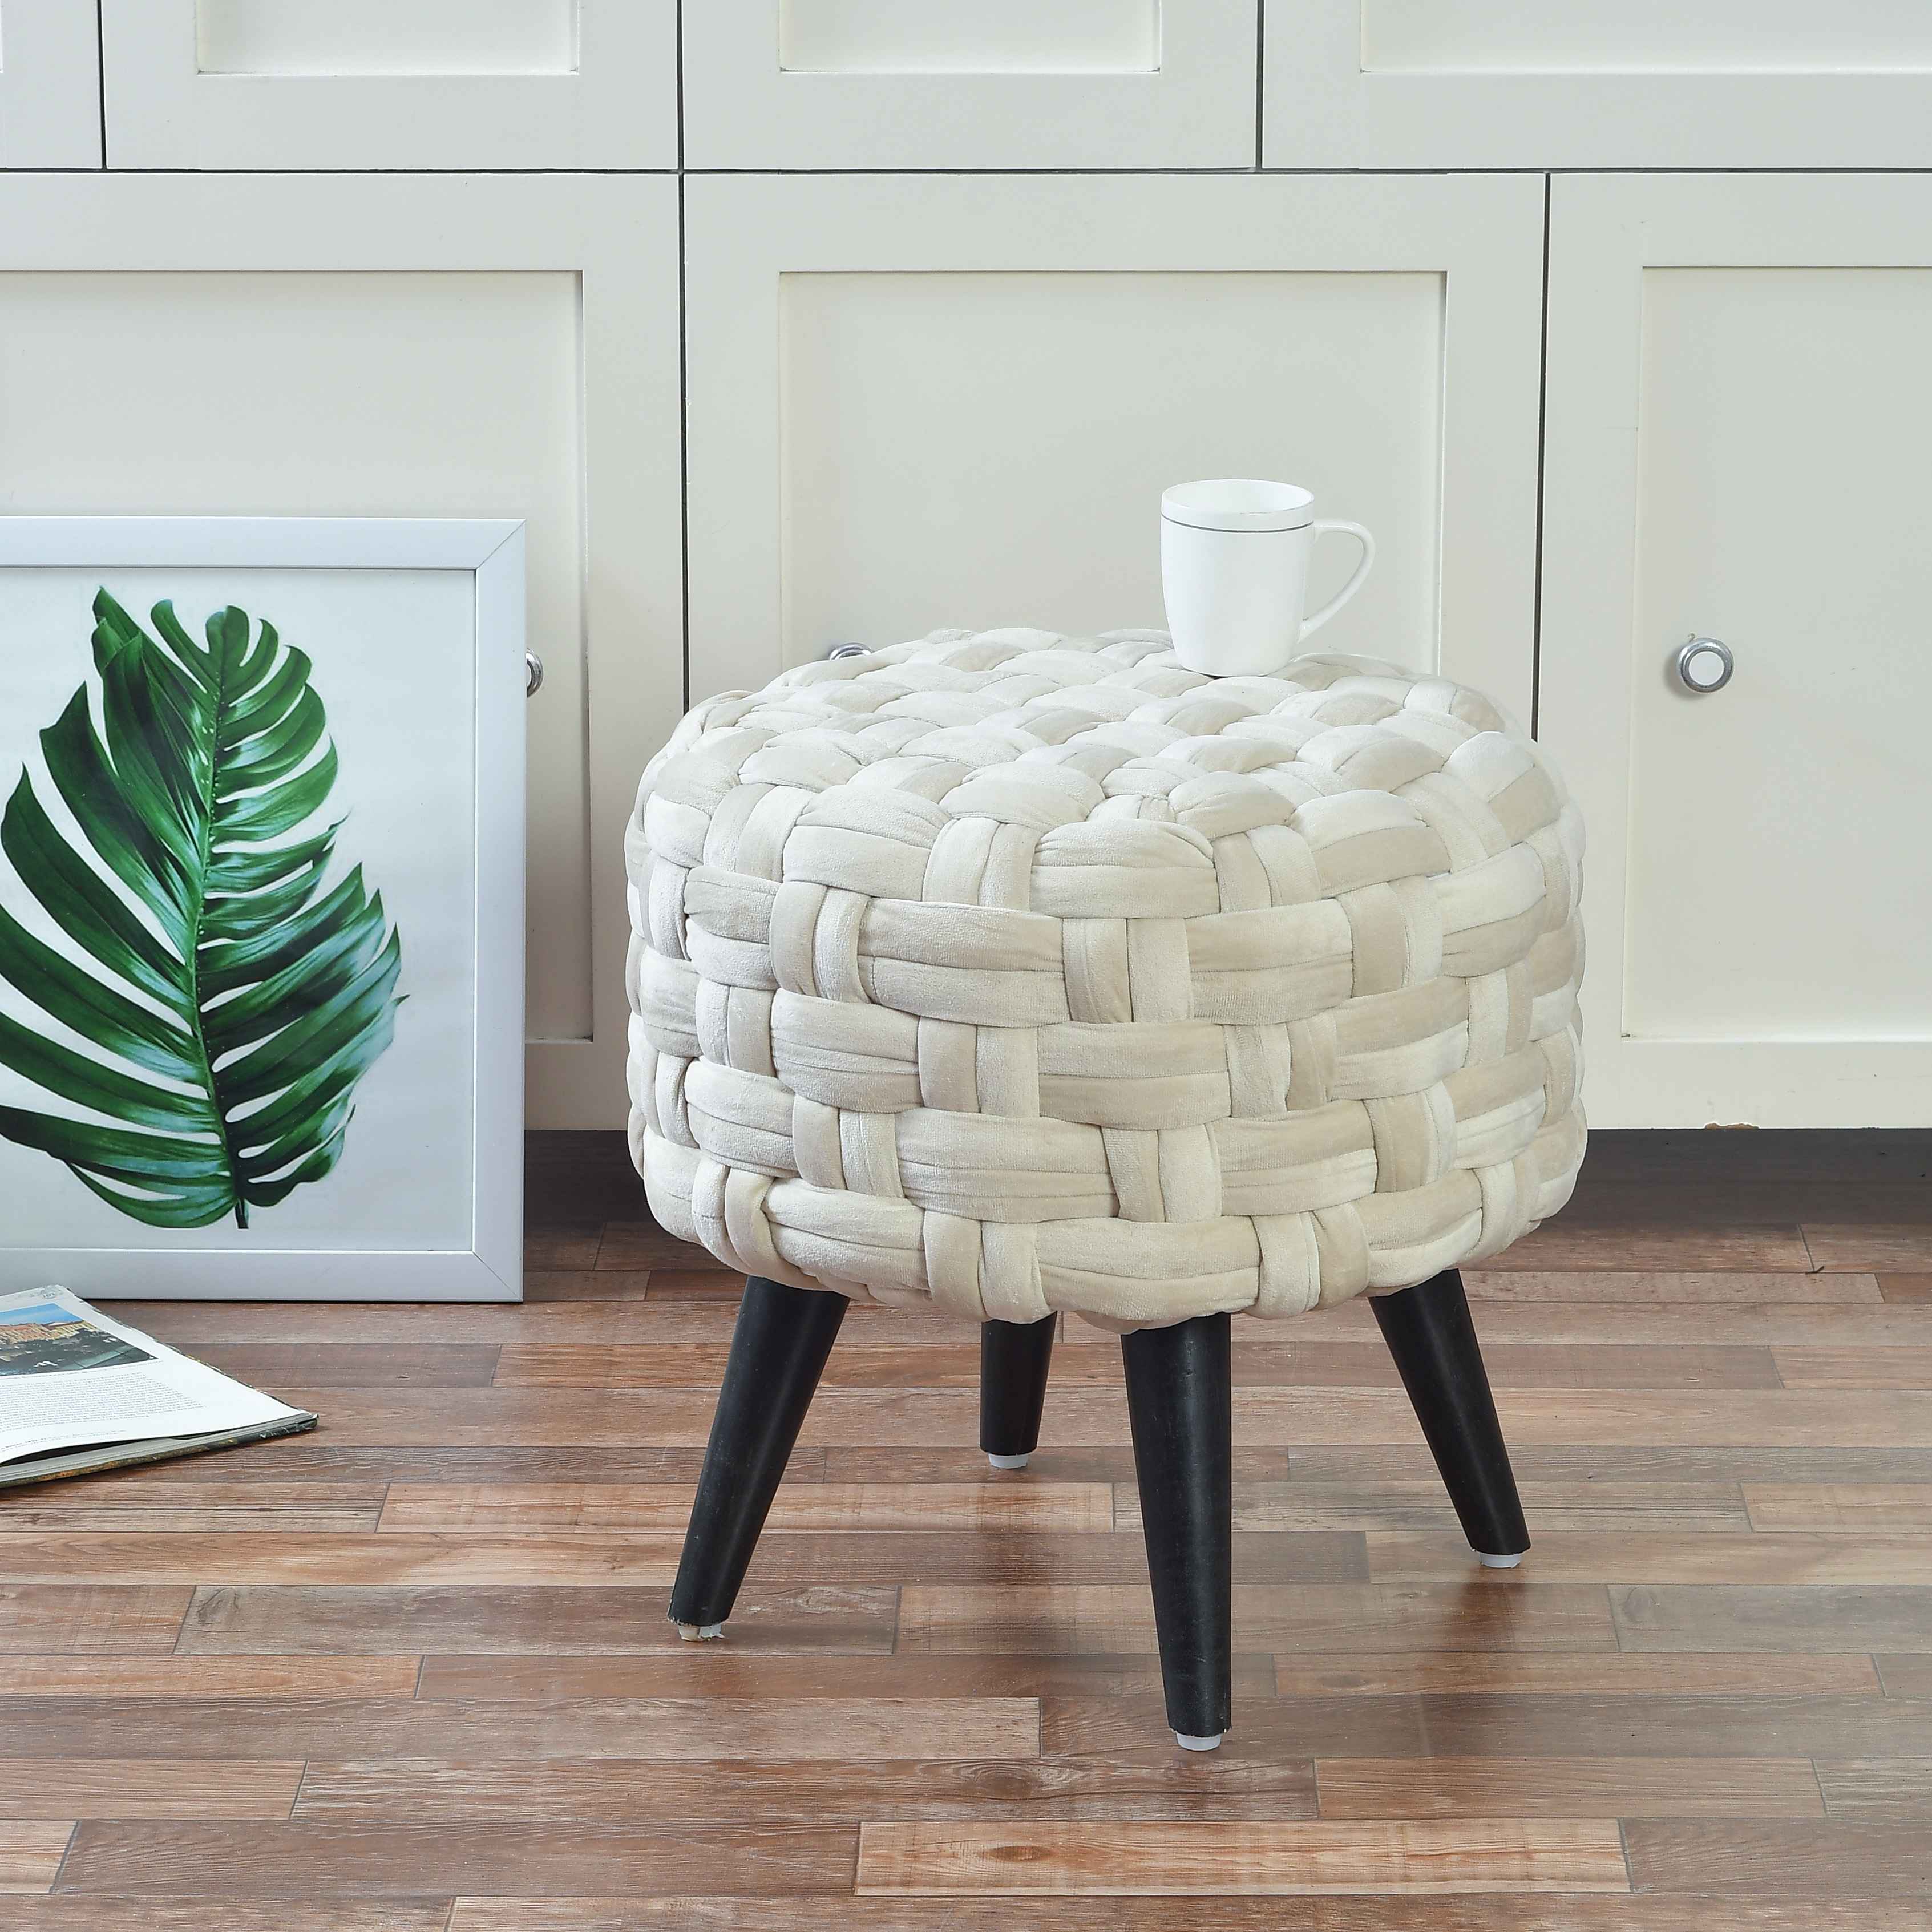 Patterned Paragon Ottomans 10